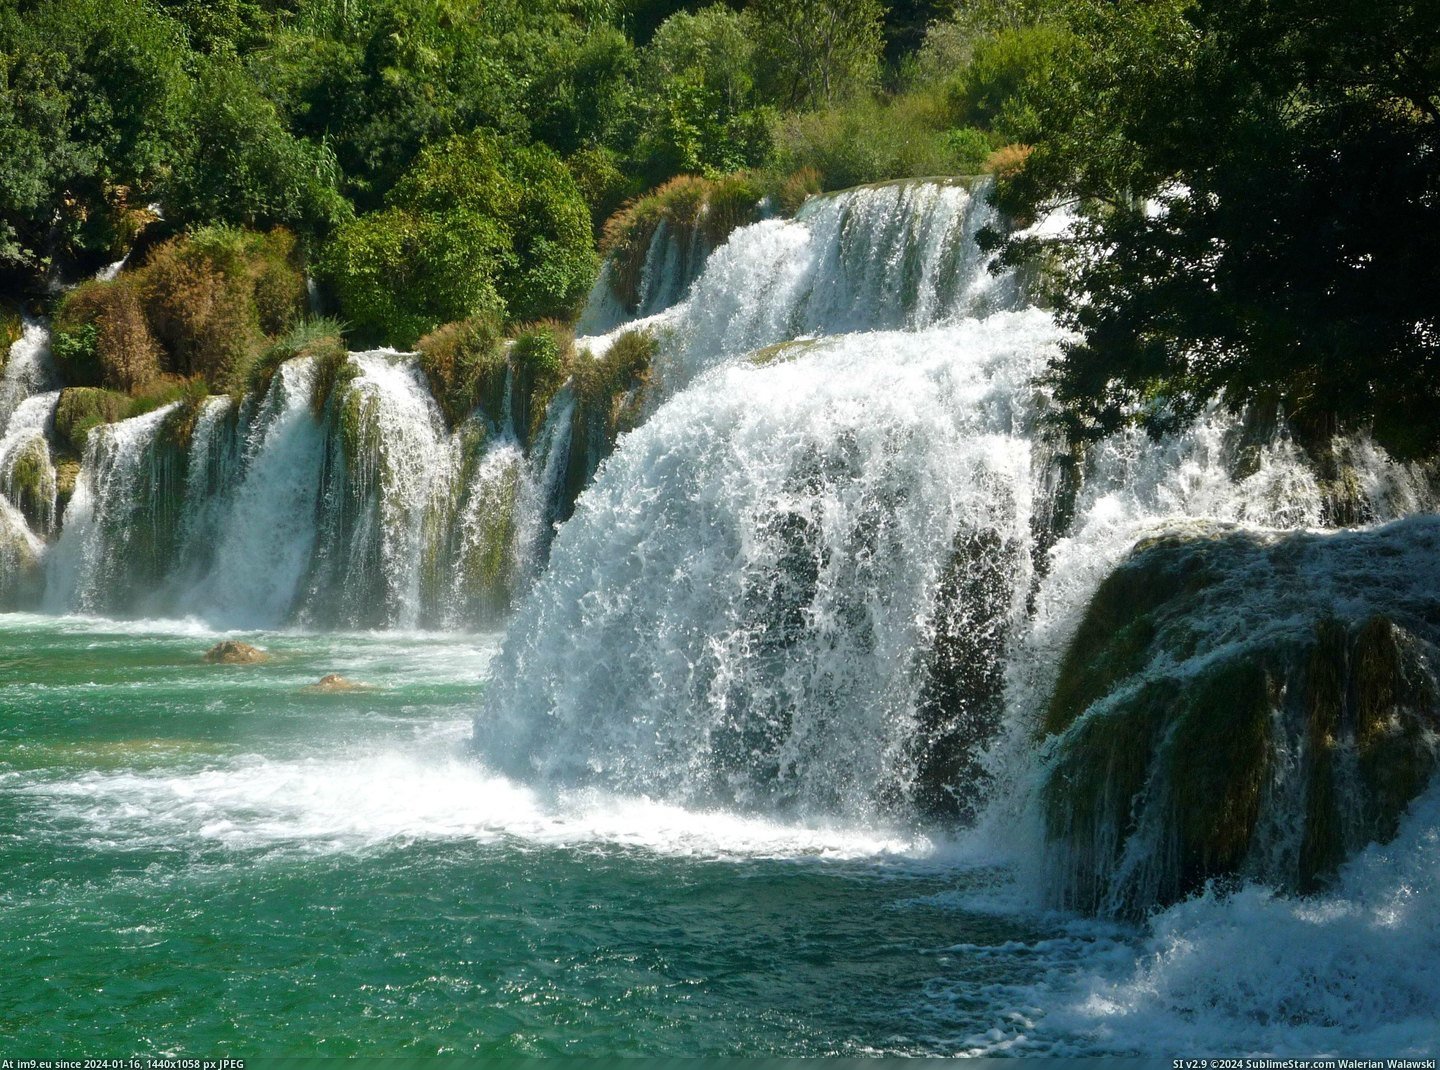 #Park #Beautiful #Croatia #Waterfalls #World #National [Earthporn] Croatia has some of the most beautiful waterfalls in the world (Krka National Park) [OC] [2736 x 2022] Pic. (Bild von album My r/EARTHPORN favs))